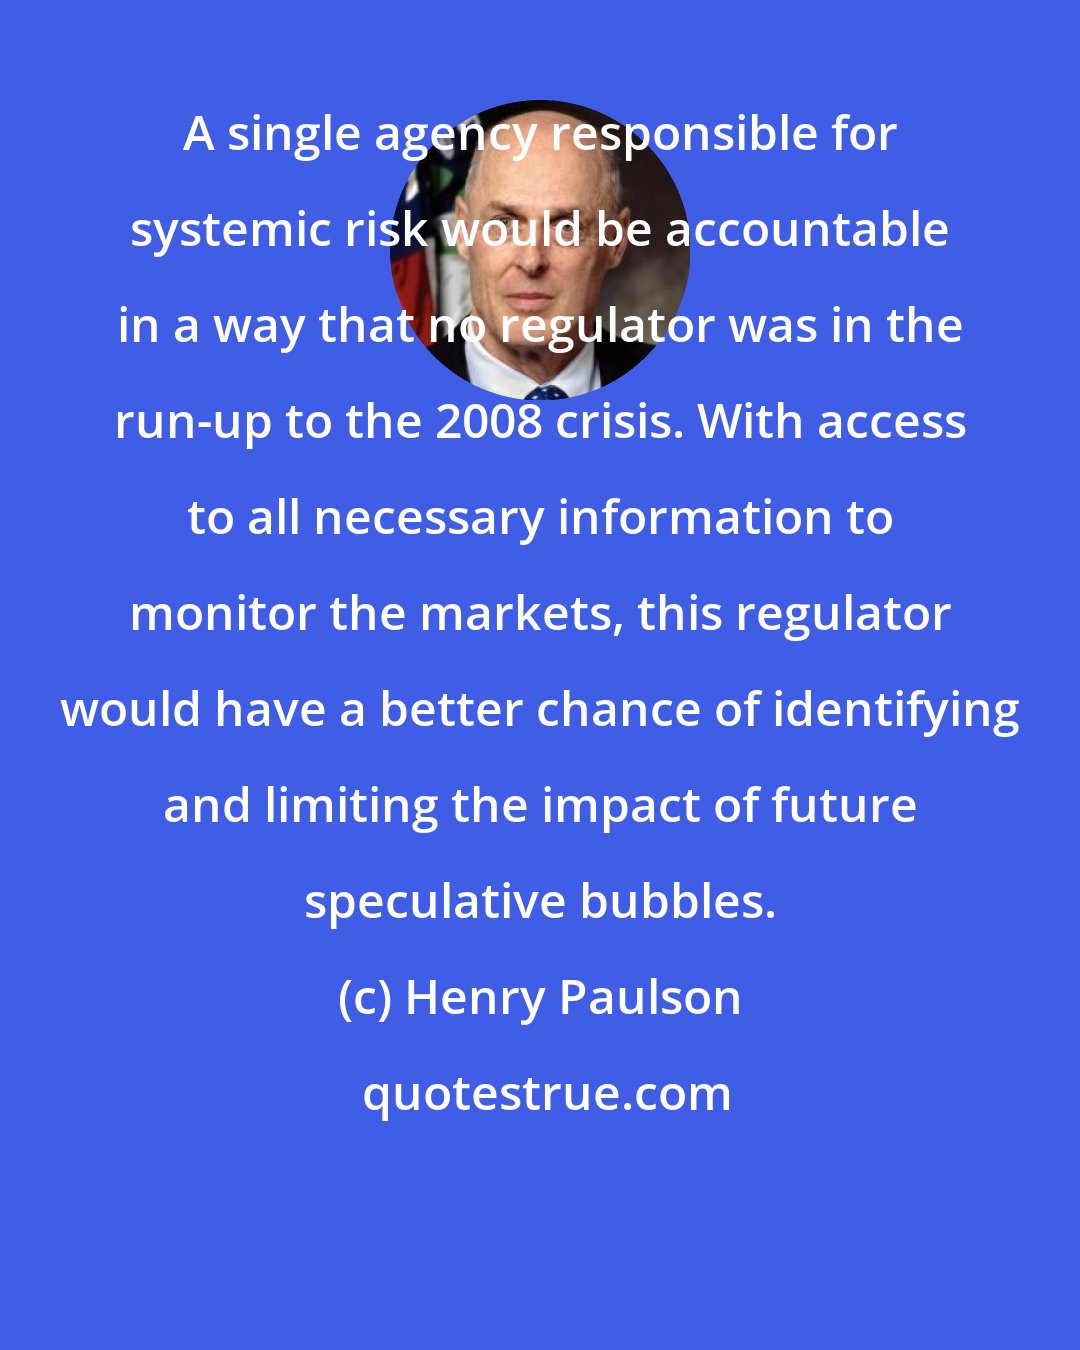 Henry Paulson: A single agency responsible for systemic risk would be accountable in a way that no regulator was in the run-up to the 2008 crisis. With access to all necessary information to monitor the markets, this regulator would have a better chance of identifying and limiting the impact of future speculative bubbles.